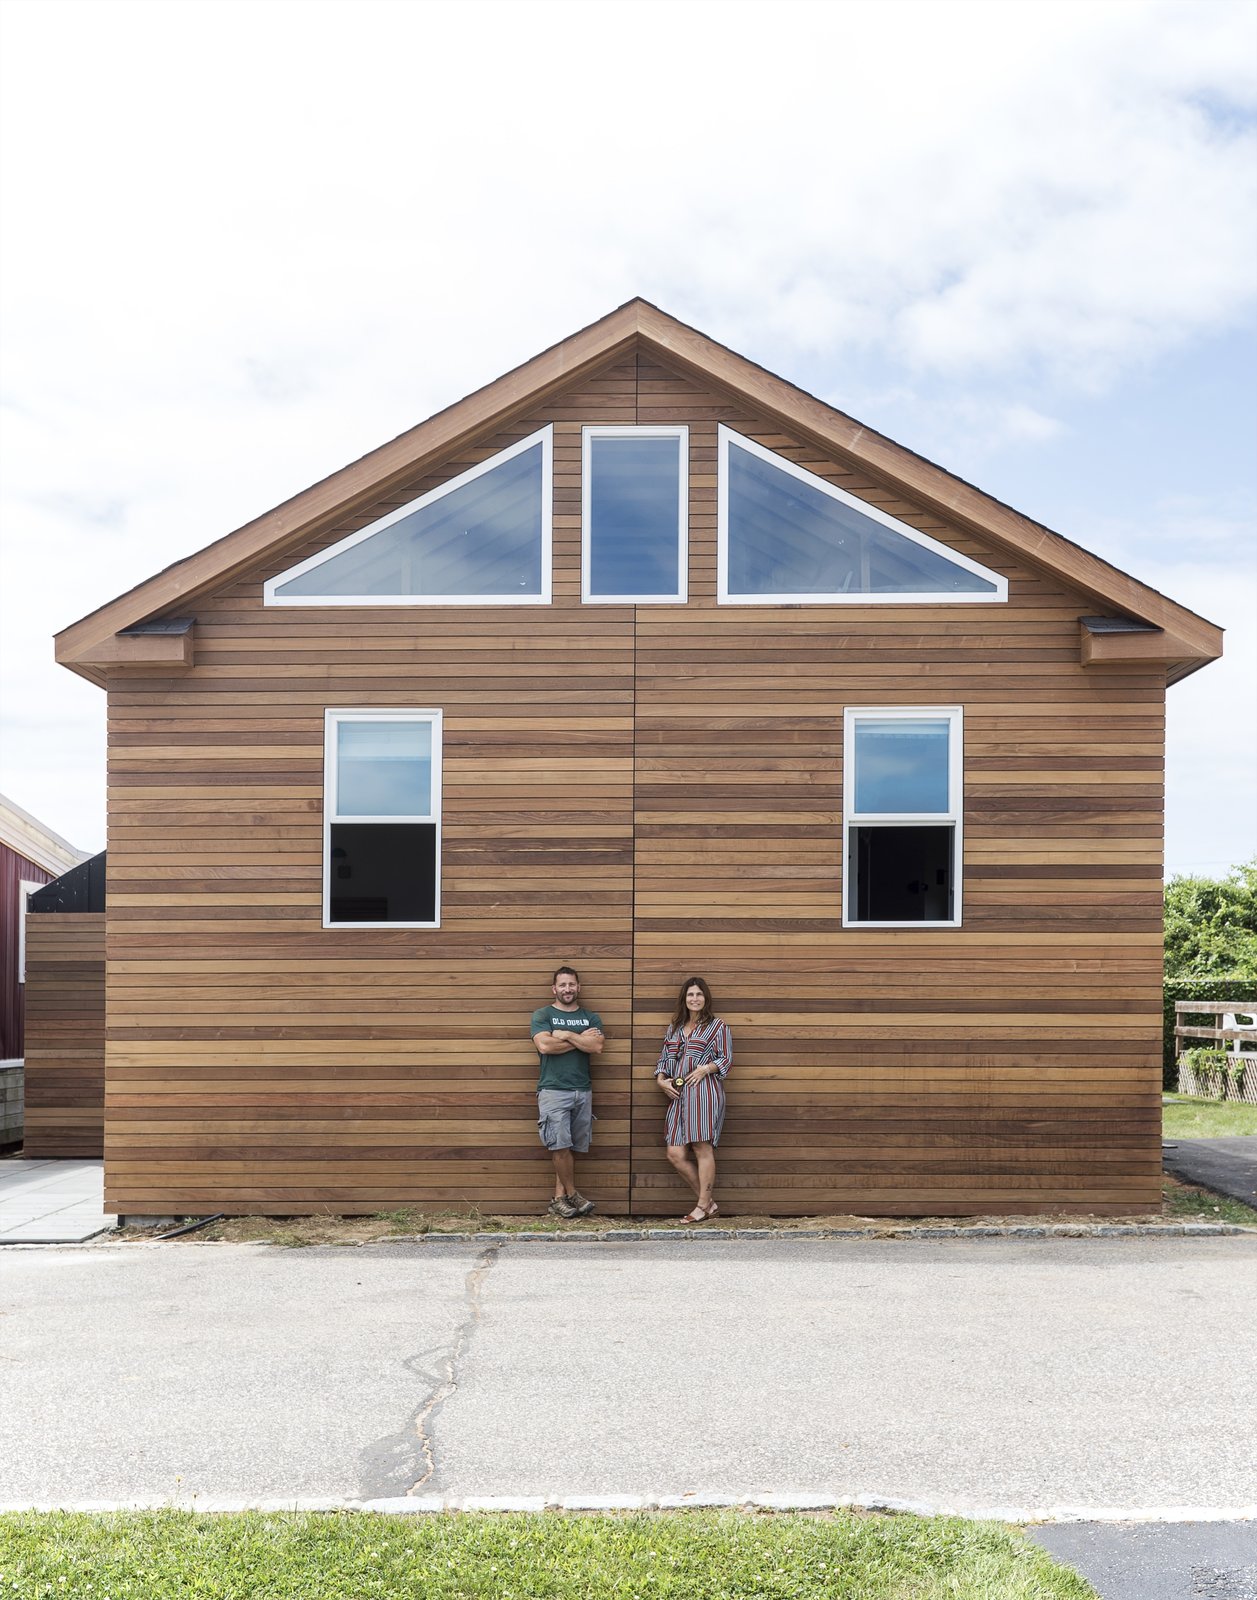 This Prefab Beach Shack in Montauk Is a Surfing Family’s Dream Come True